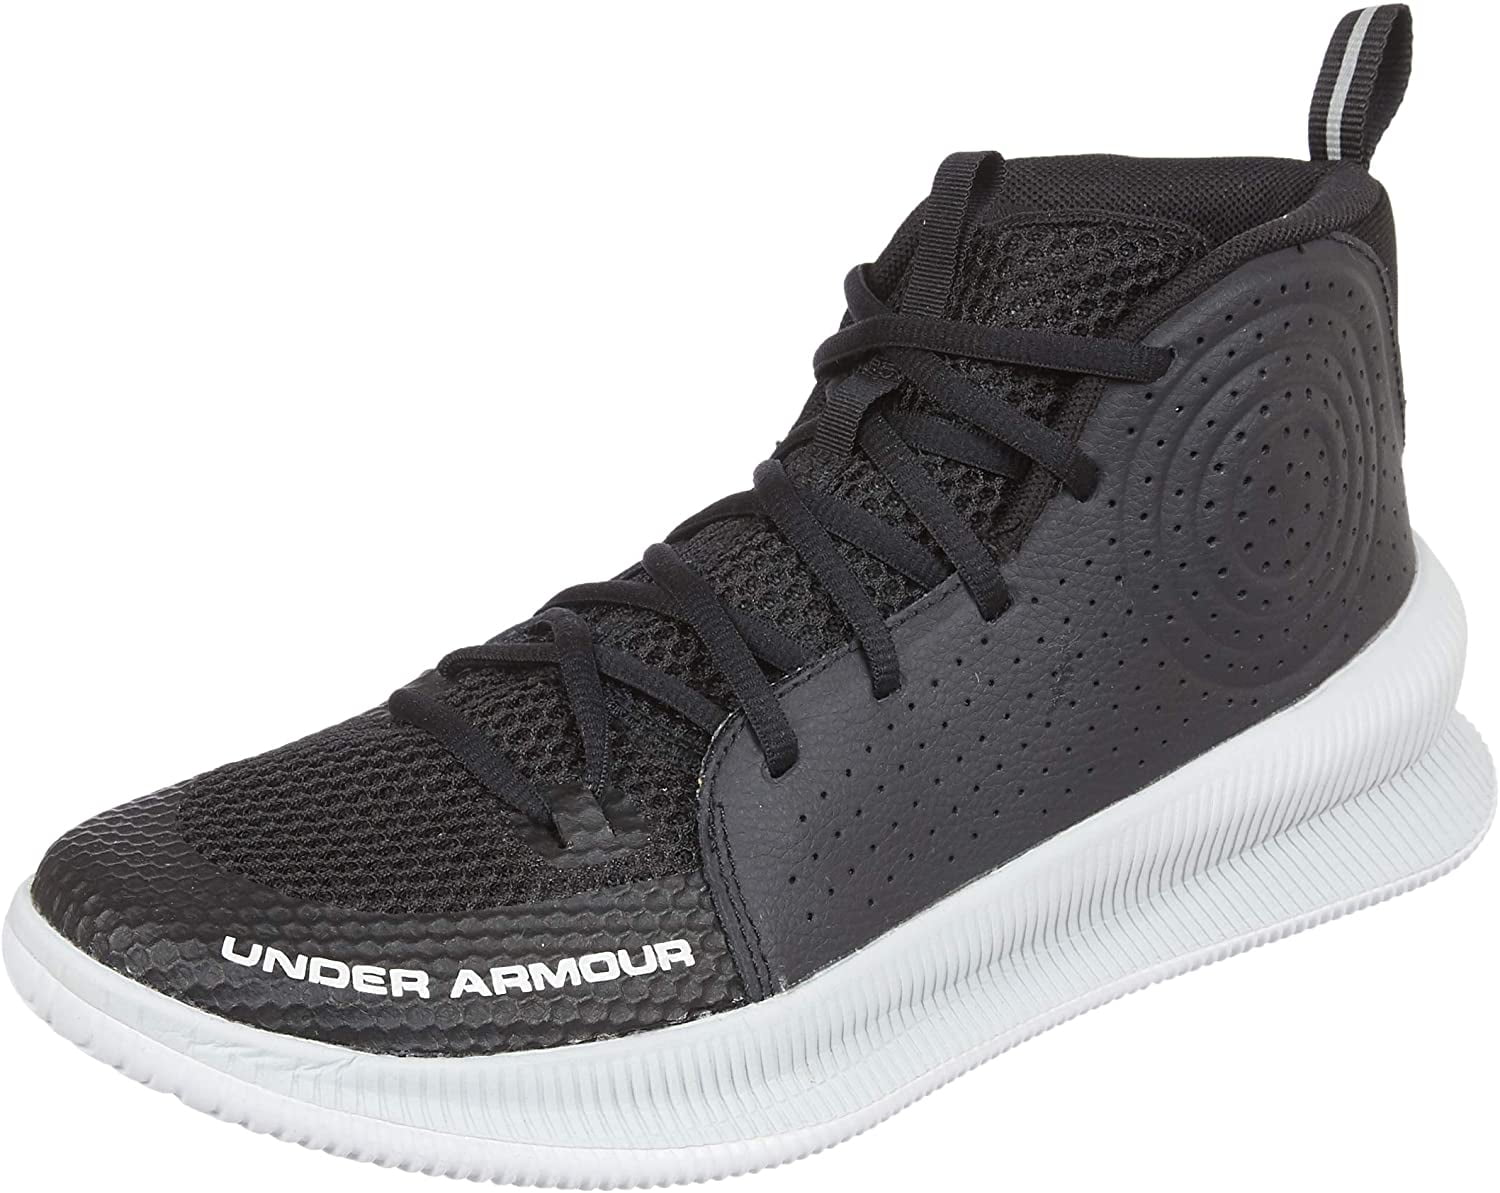 Under Armour Mens Jet Basketball Shoes 